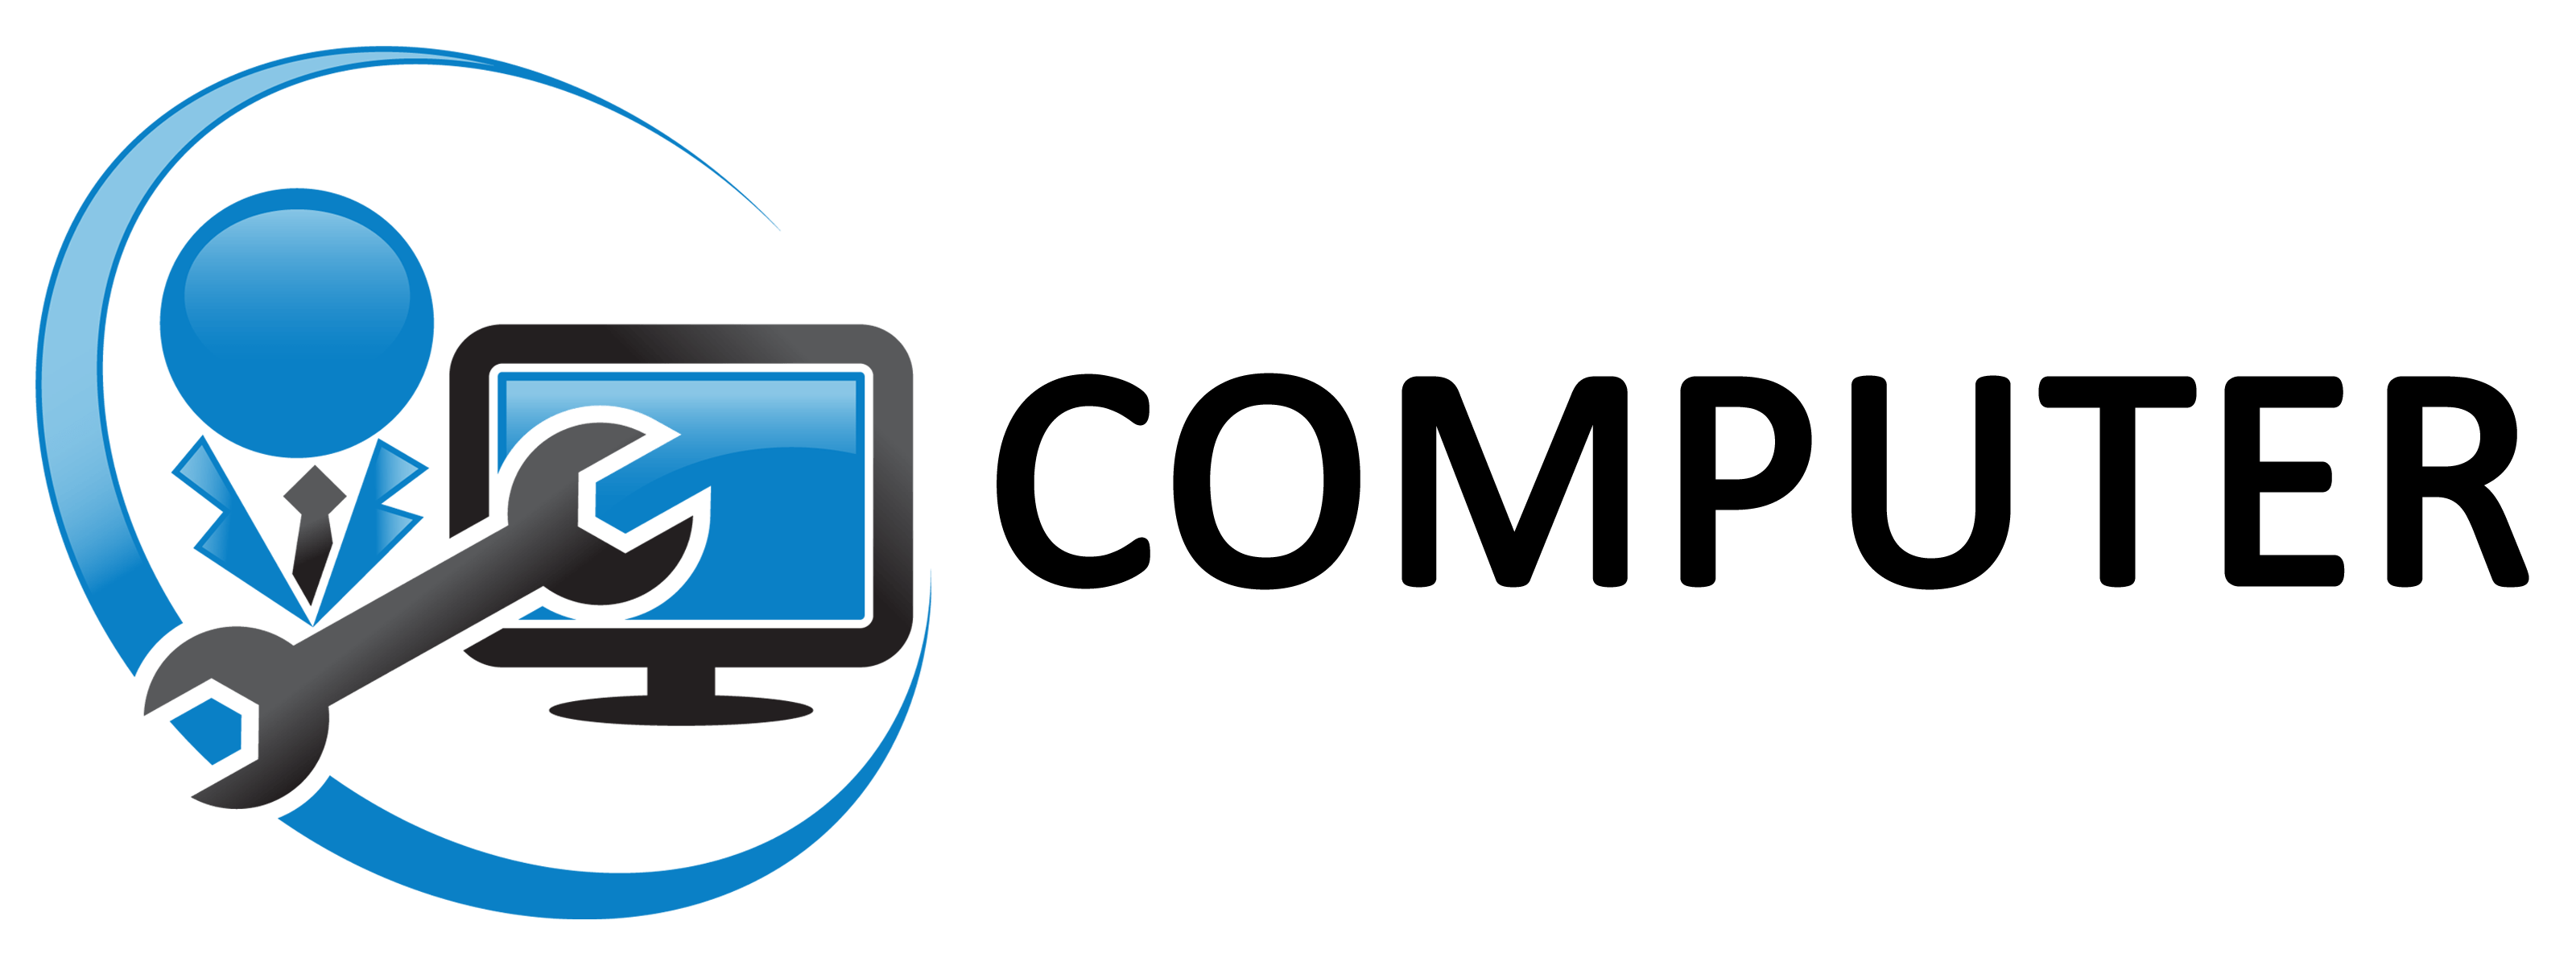 Computer Services Logo - Yorkshire Computer Services - IT Support, Computer Repairs, Web Design